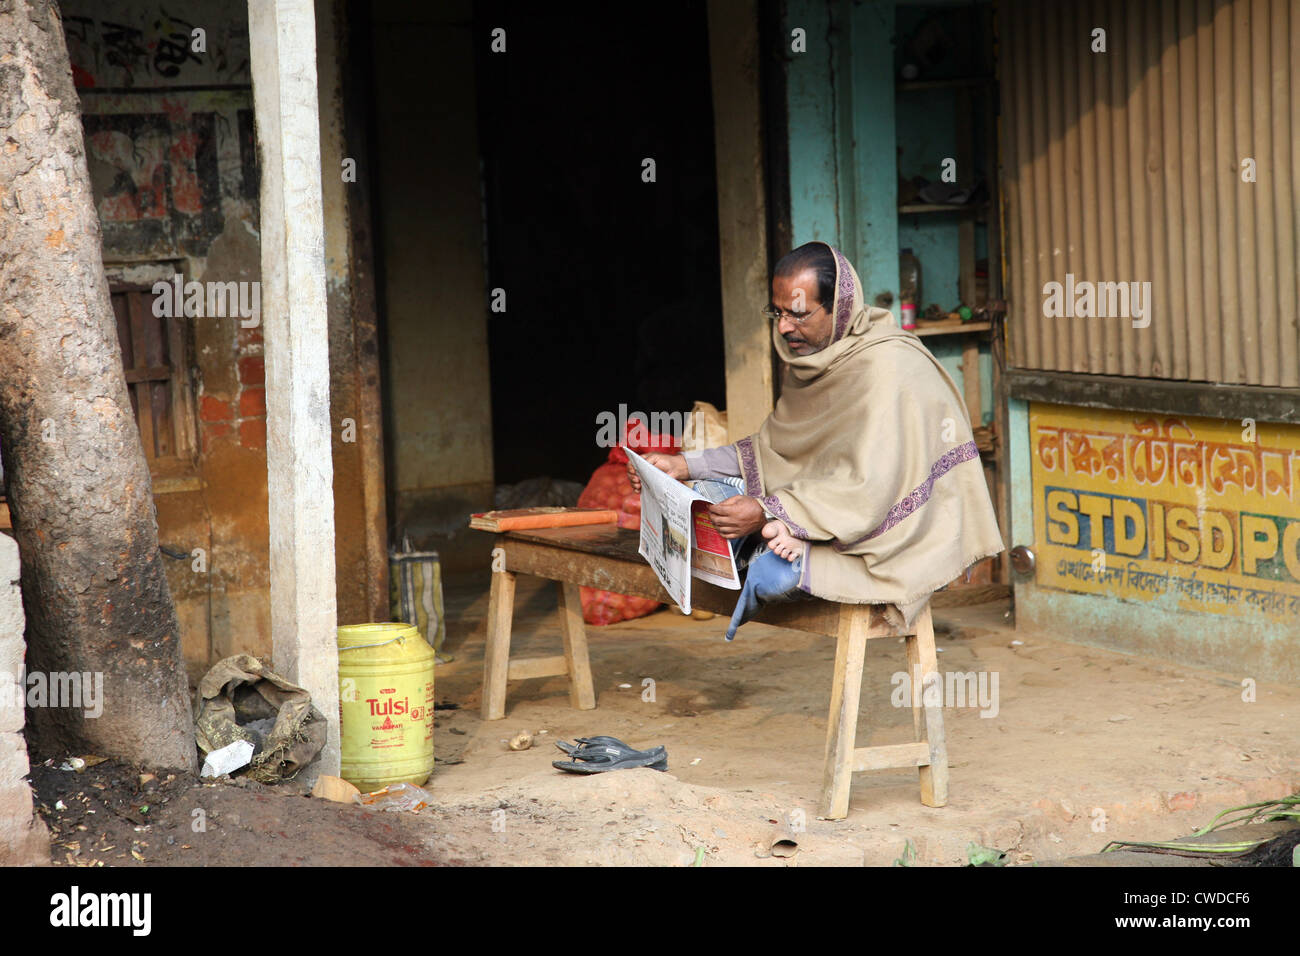 Man reading the newspaper while ignoring everything around him, in Baruipur, West Bengal, India on January 13, 2009. Stock Photo